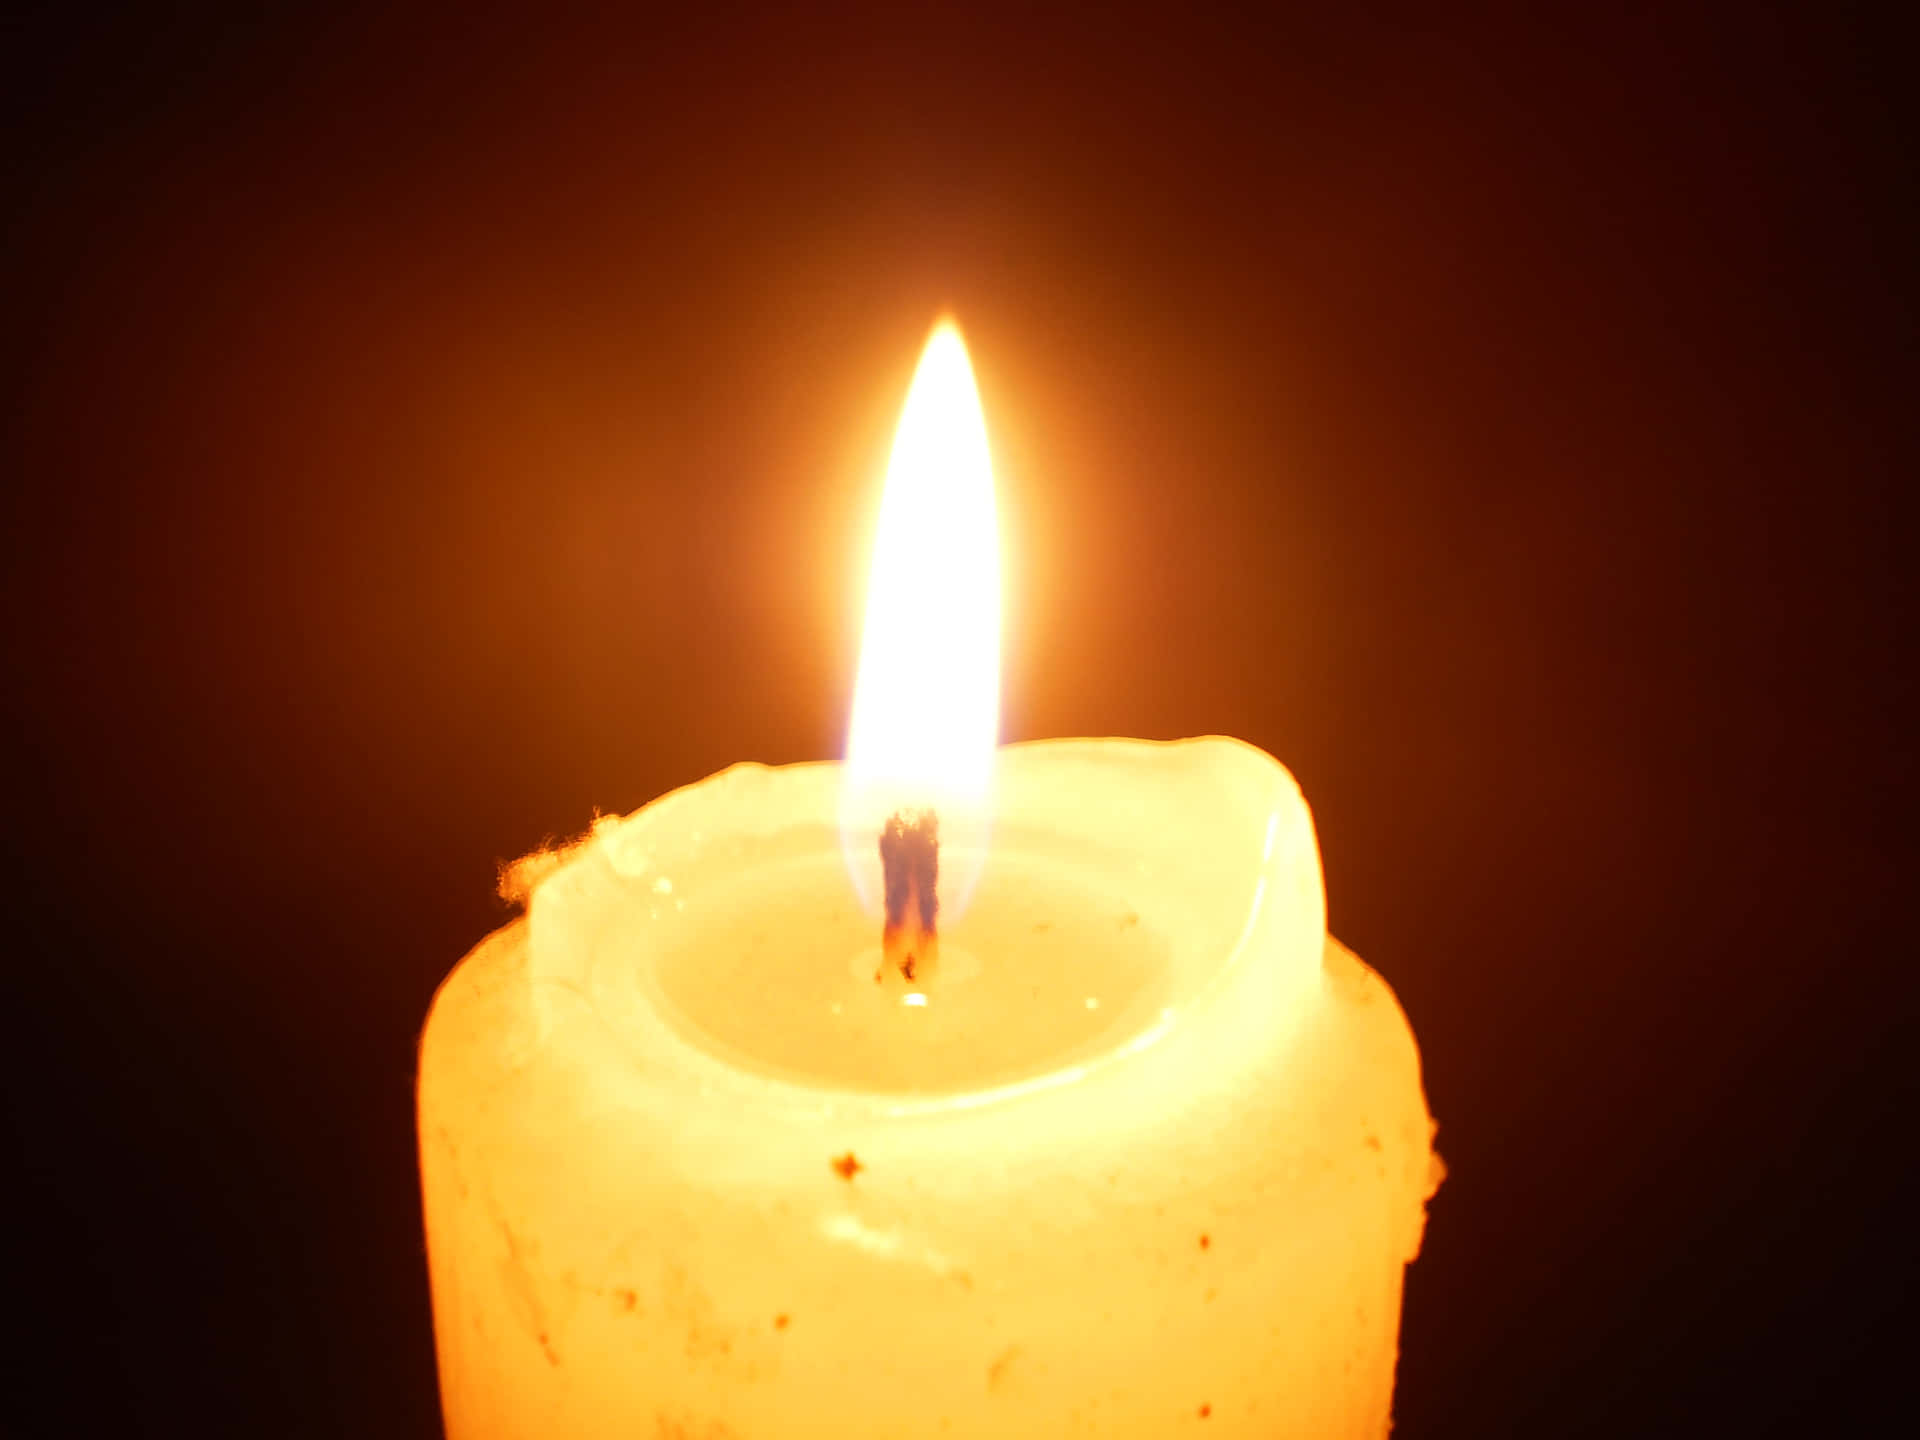 A Candle Is Lit On A Black Background